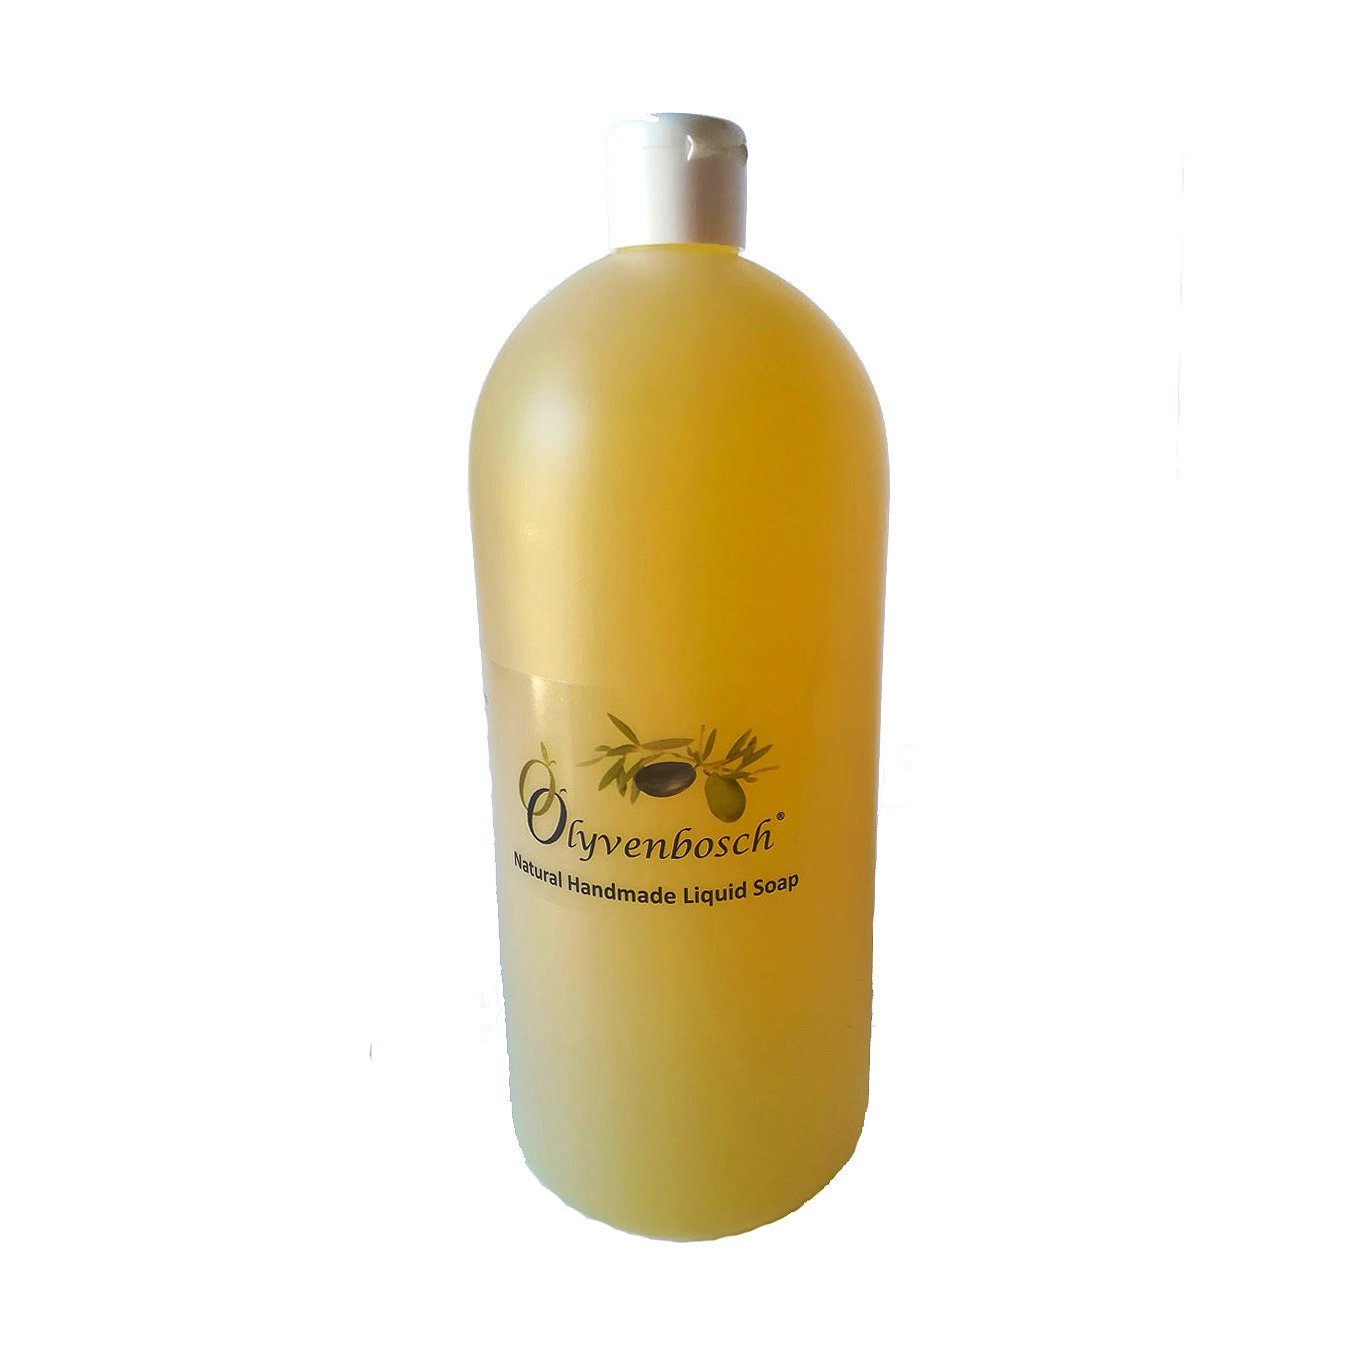 Olyvenbosch Pure Olive Oil Liquid Soap Hand & Body Washes Olyvenbosch Olive Farm 1litre 